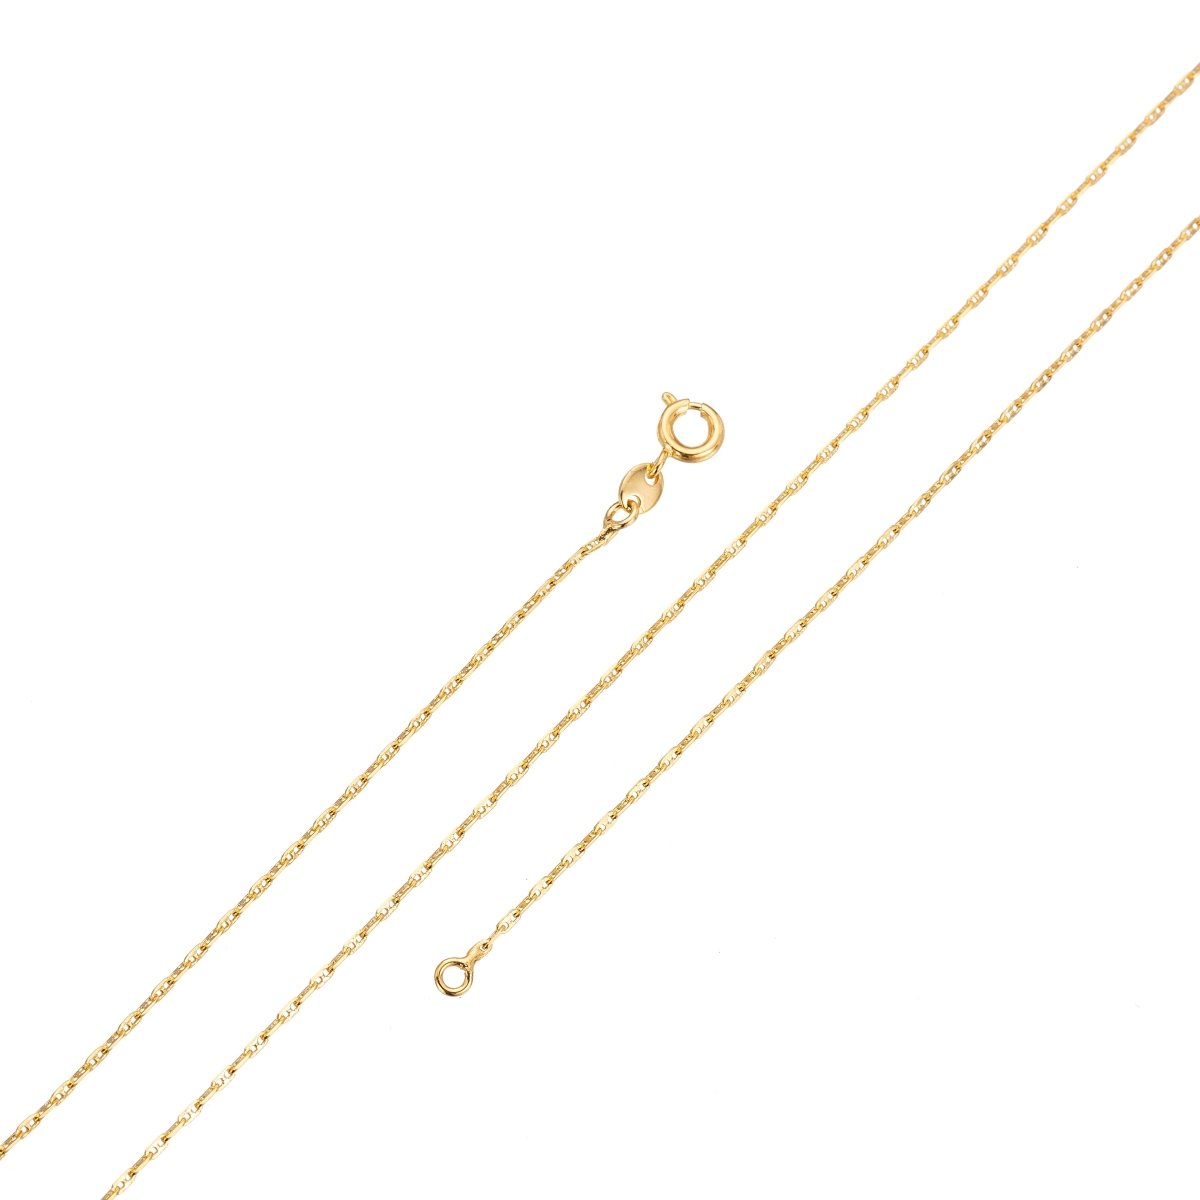 24K Gold Filled Anchor Chain Necklace, 20 inches Anchor Finished Necklace For Jewelry Making, Dainty 1.3mm Anchor Necklace w/Spring Ring | CN-013 - DLUXCA